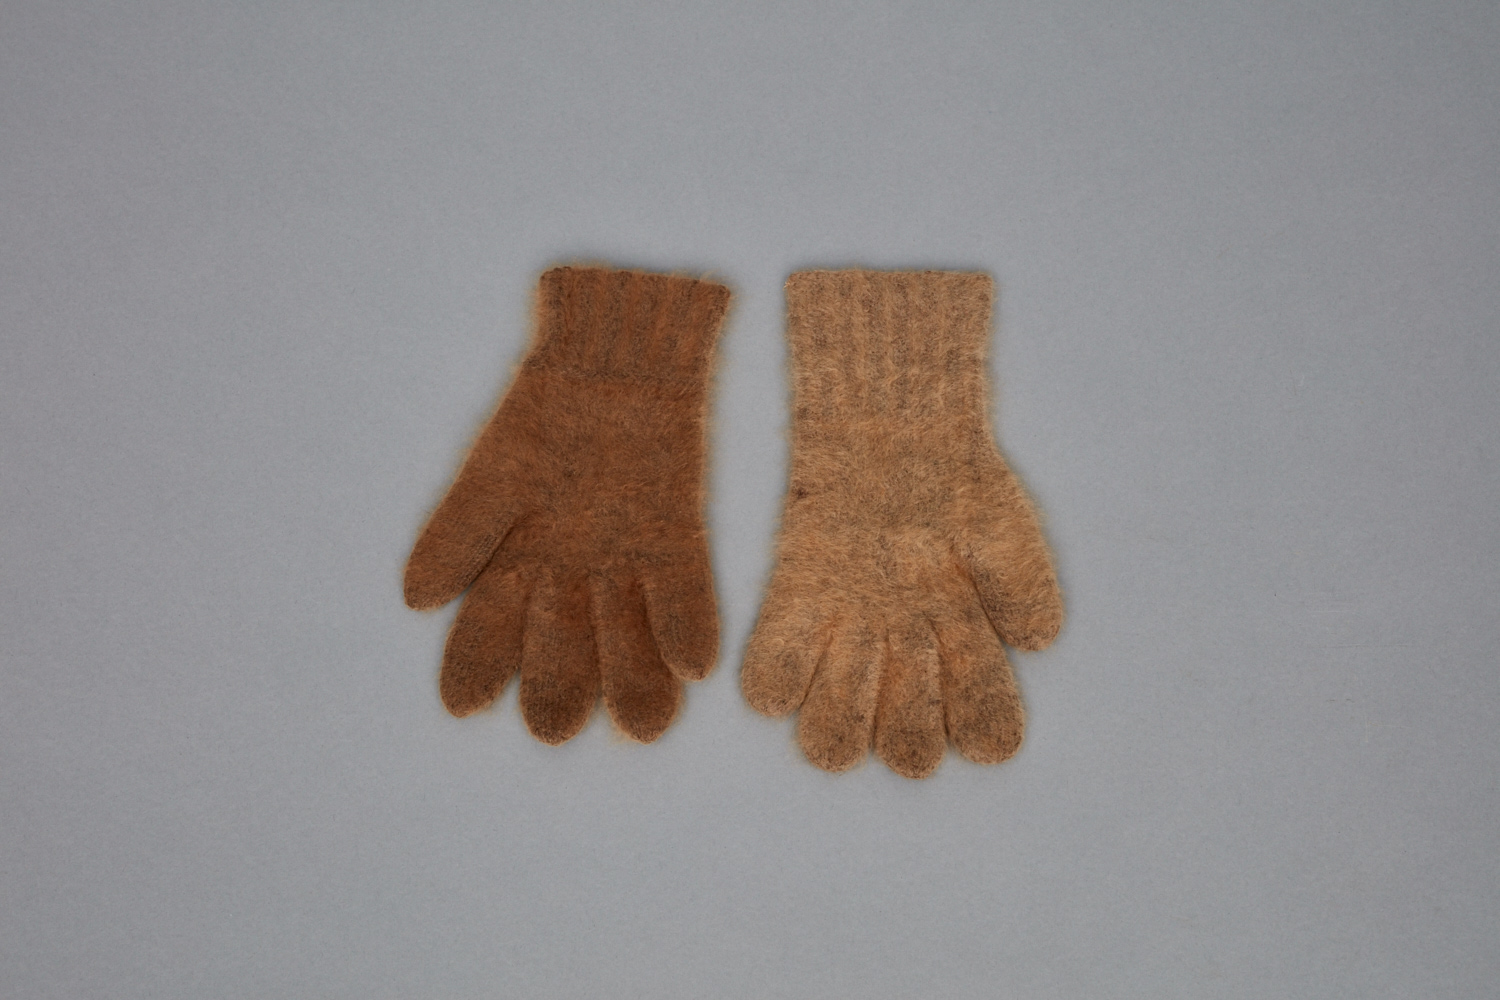 A pair of brown wool gloves on a gray surface.